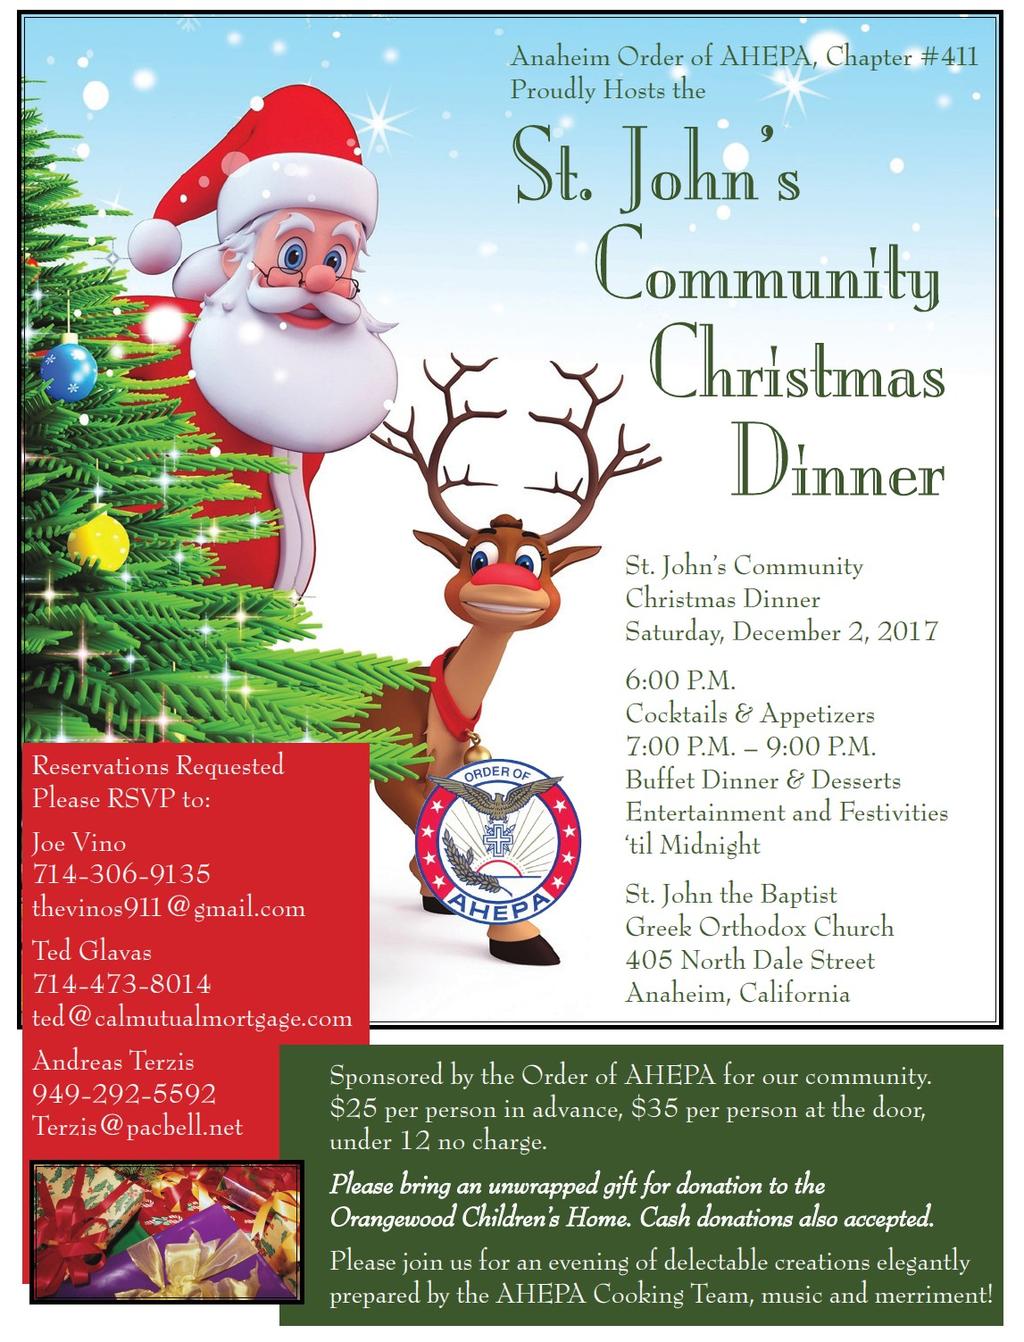 ST. JOHN S SUNDAY CHURCH SCHOOL POINSETTIA FUNDRAISER Show your Christmas spirit by filling your home with beautiful poinsettias! St.